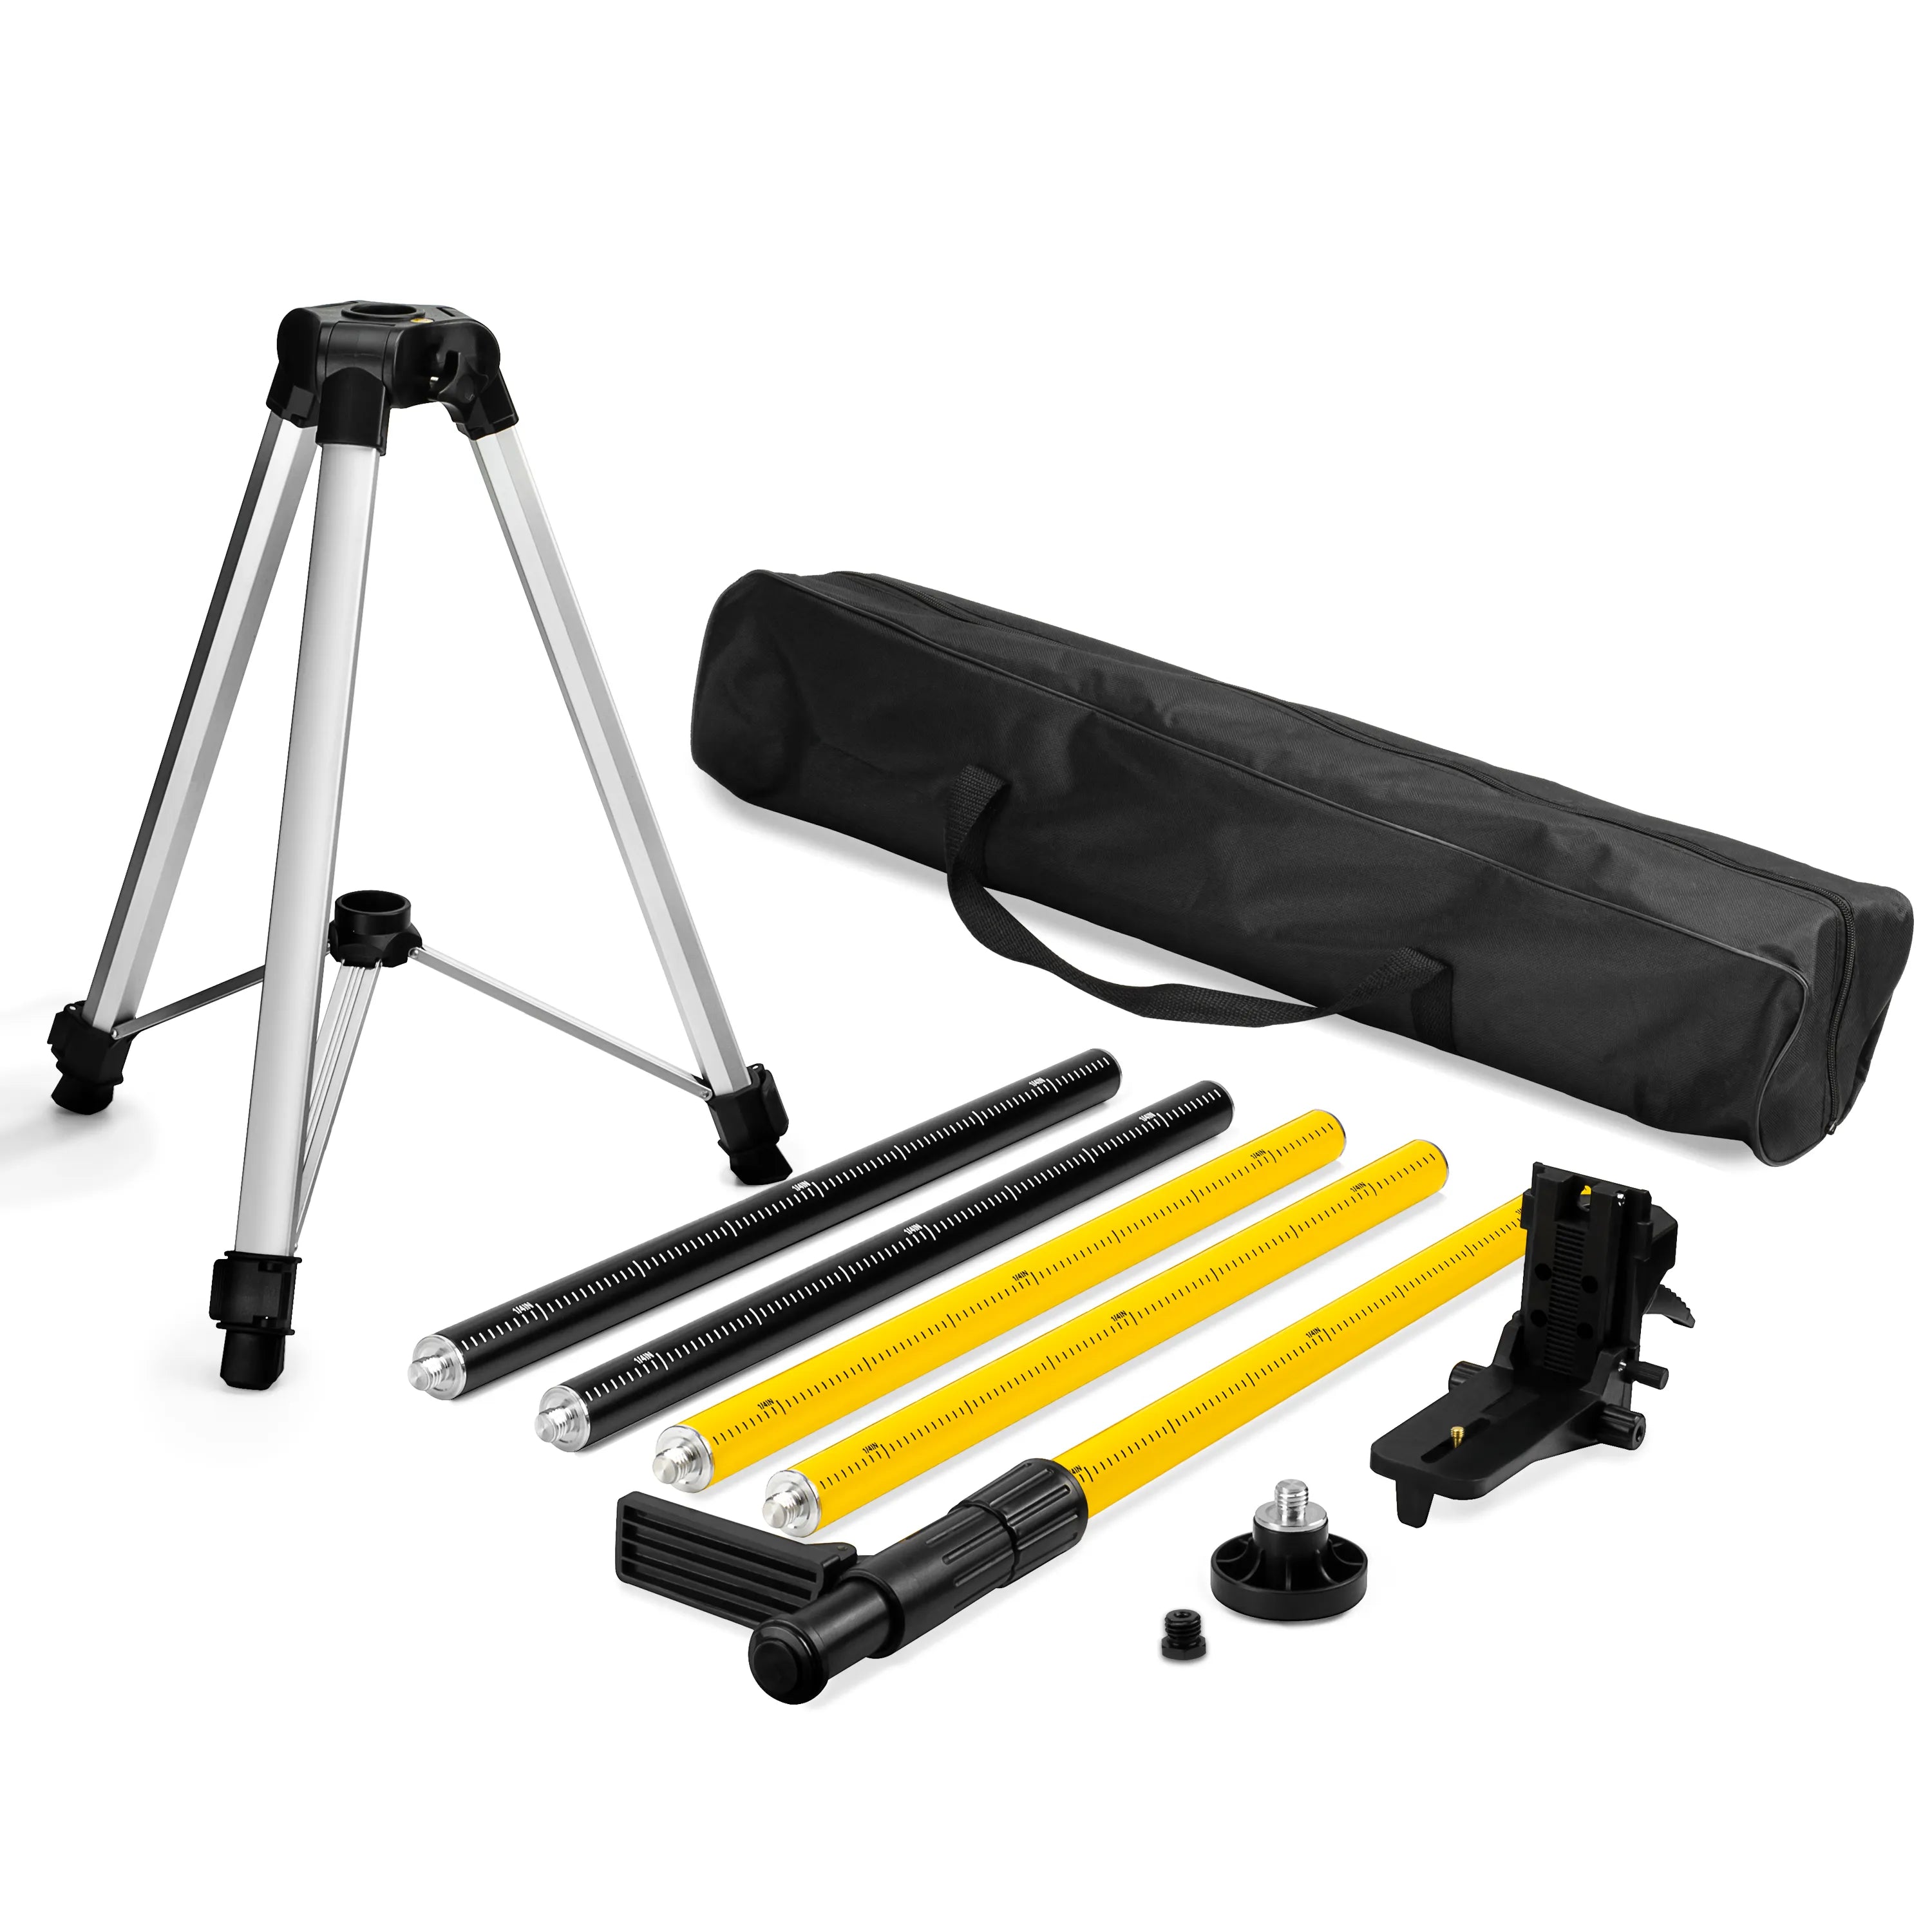 KAIWEETS KT-100P Laser Level Telescoping Pole with Tripod and Mount